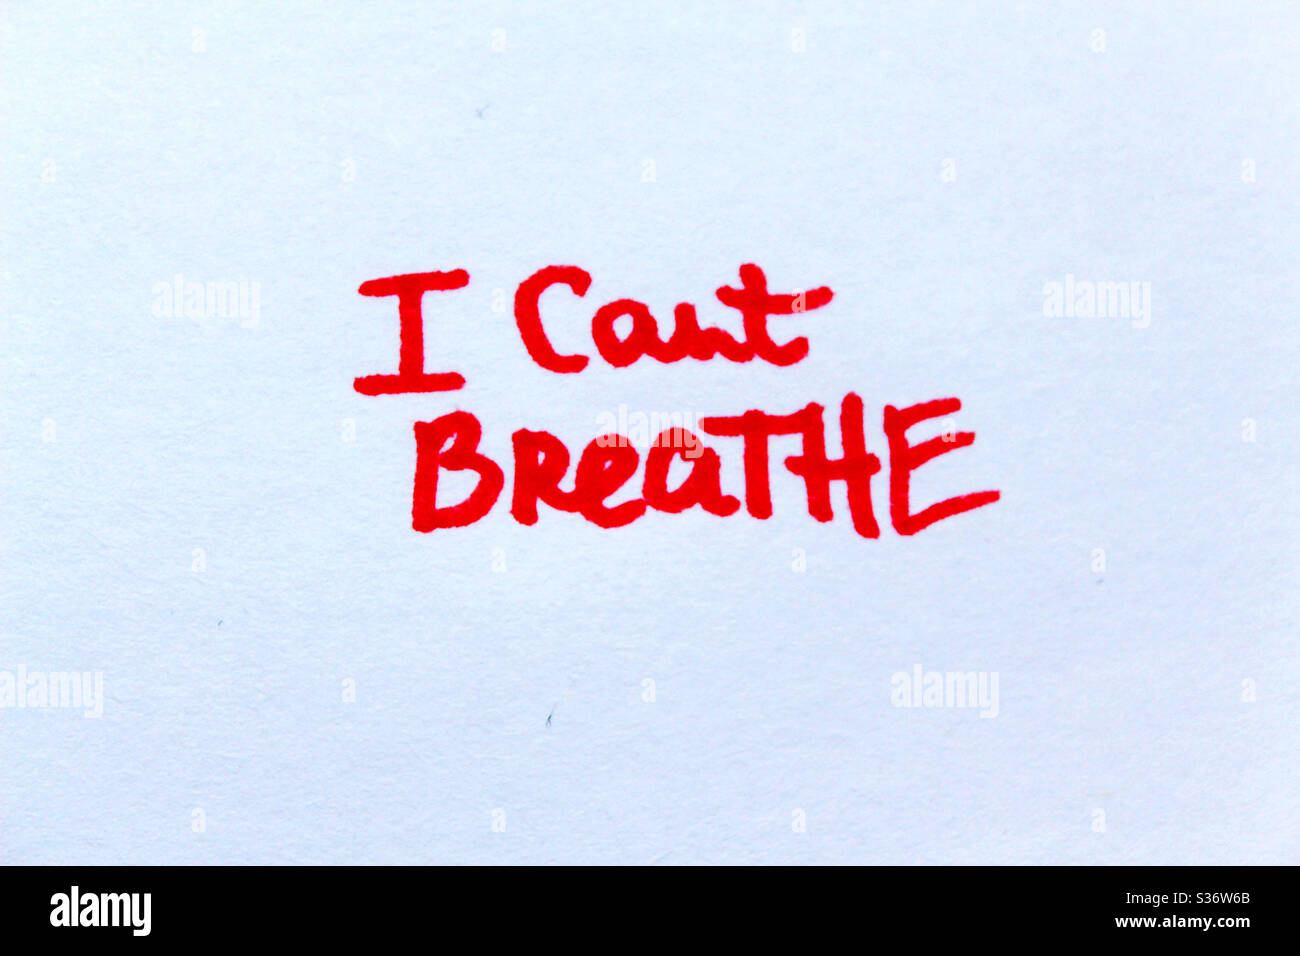 I Can’t Breathe. Handwritten message in red on a paper. Stock Photo